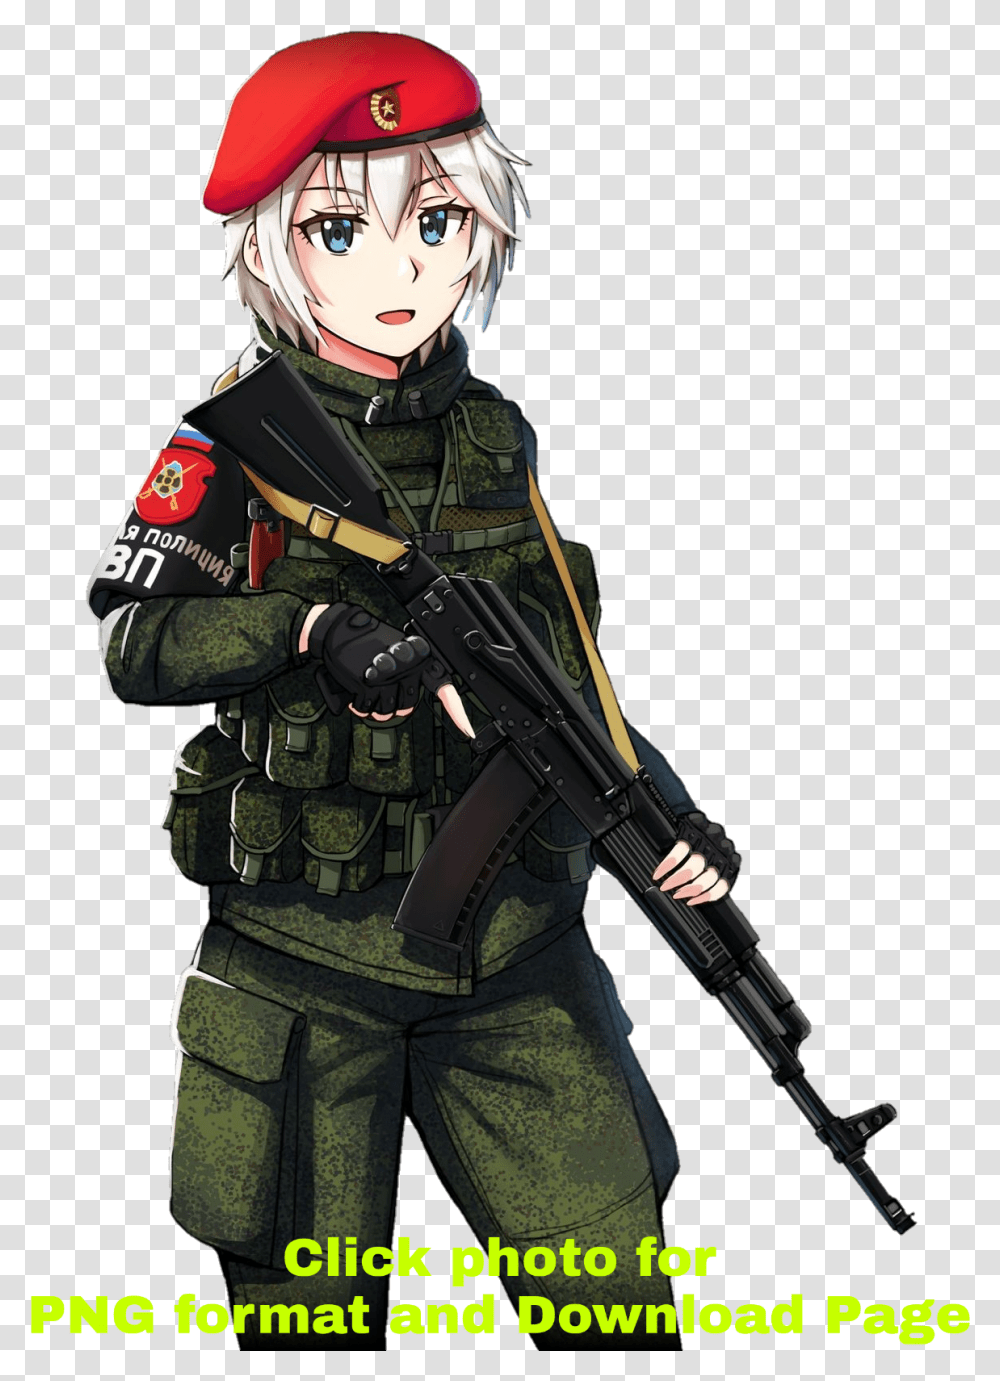 Russian Army Anime Girl, Military Uniform, Gun, Weapon, Weaponry Transparent Png